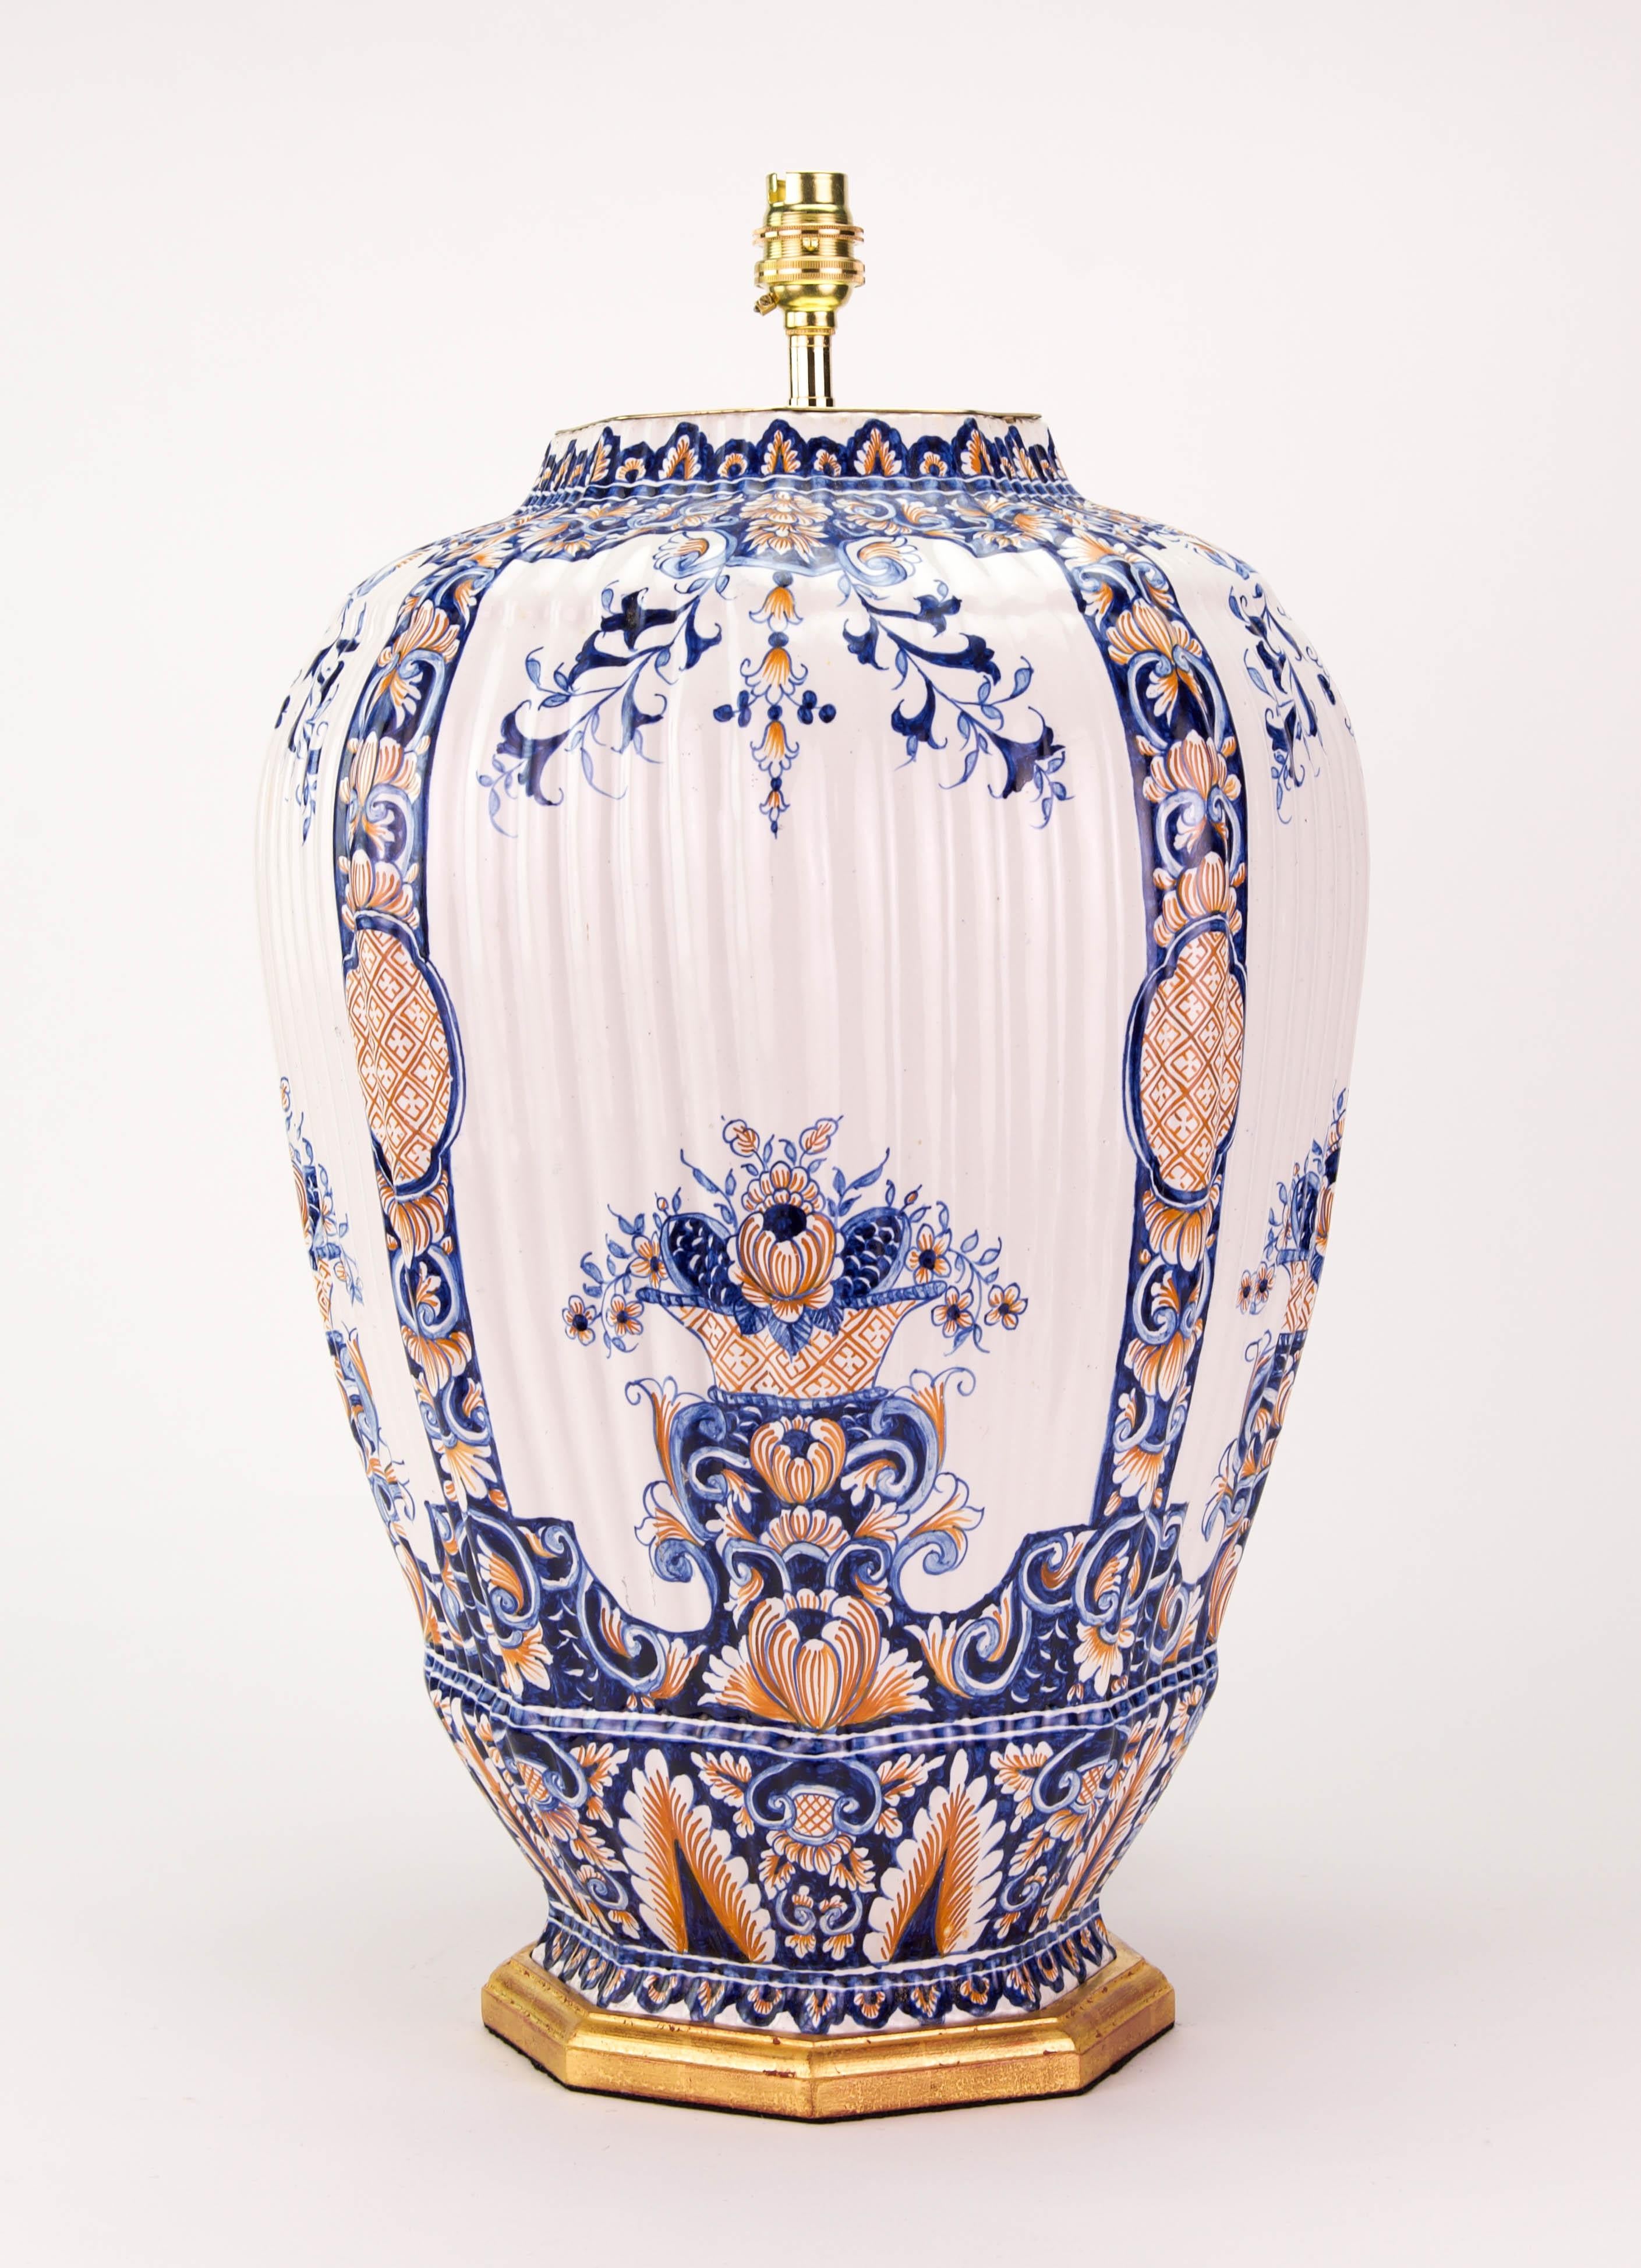 A fine large French faience vase, of hexagonal form with ribbed mouldings, and beautifully decorated in tones of blue and red on a predominantly white ground, with stylised foliage and flowers throughout, now mounted as a lamp with a giltwood